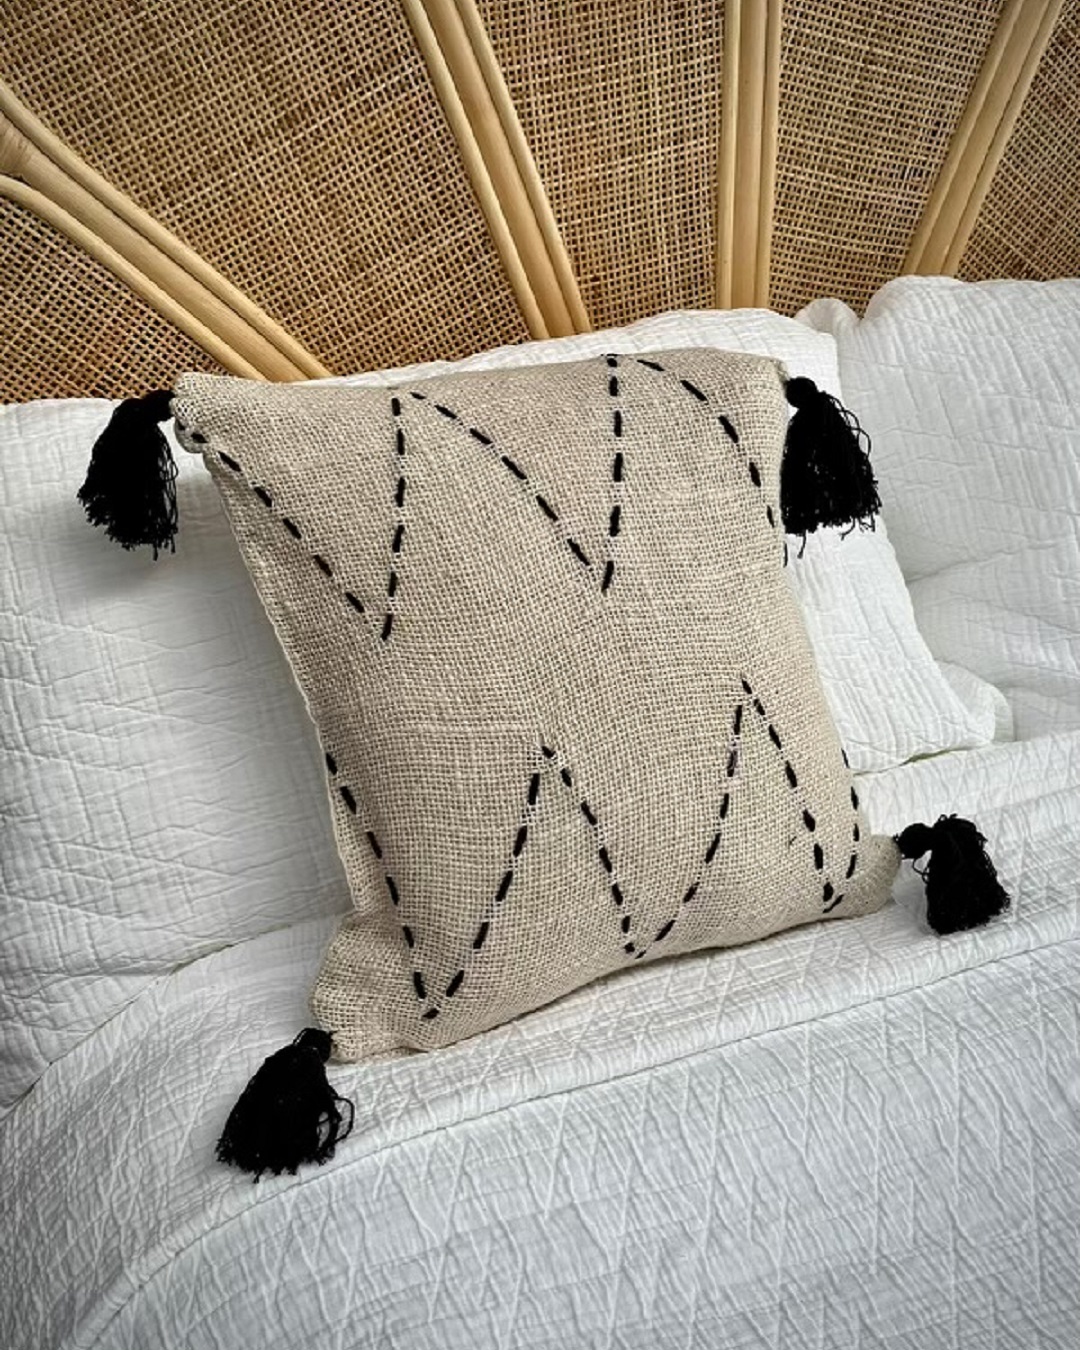 Woven cushion cover with black stitching and tassels on bed